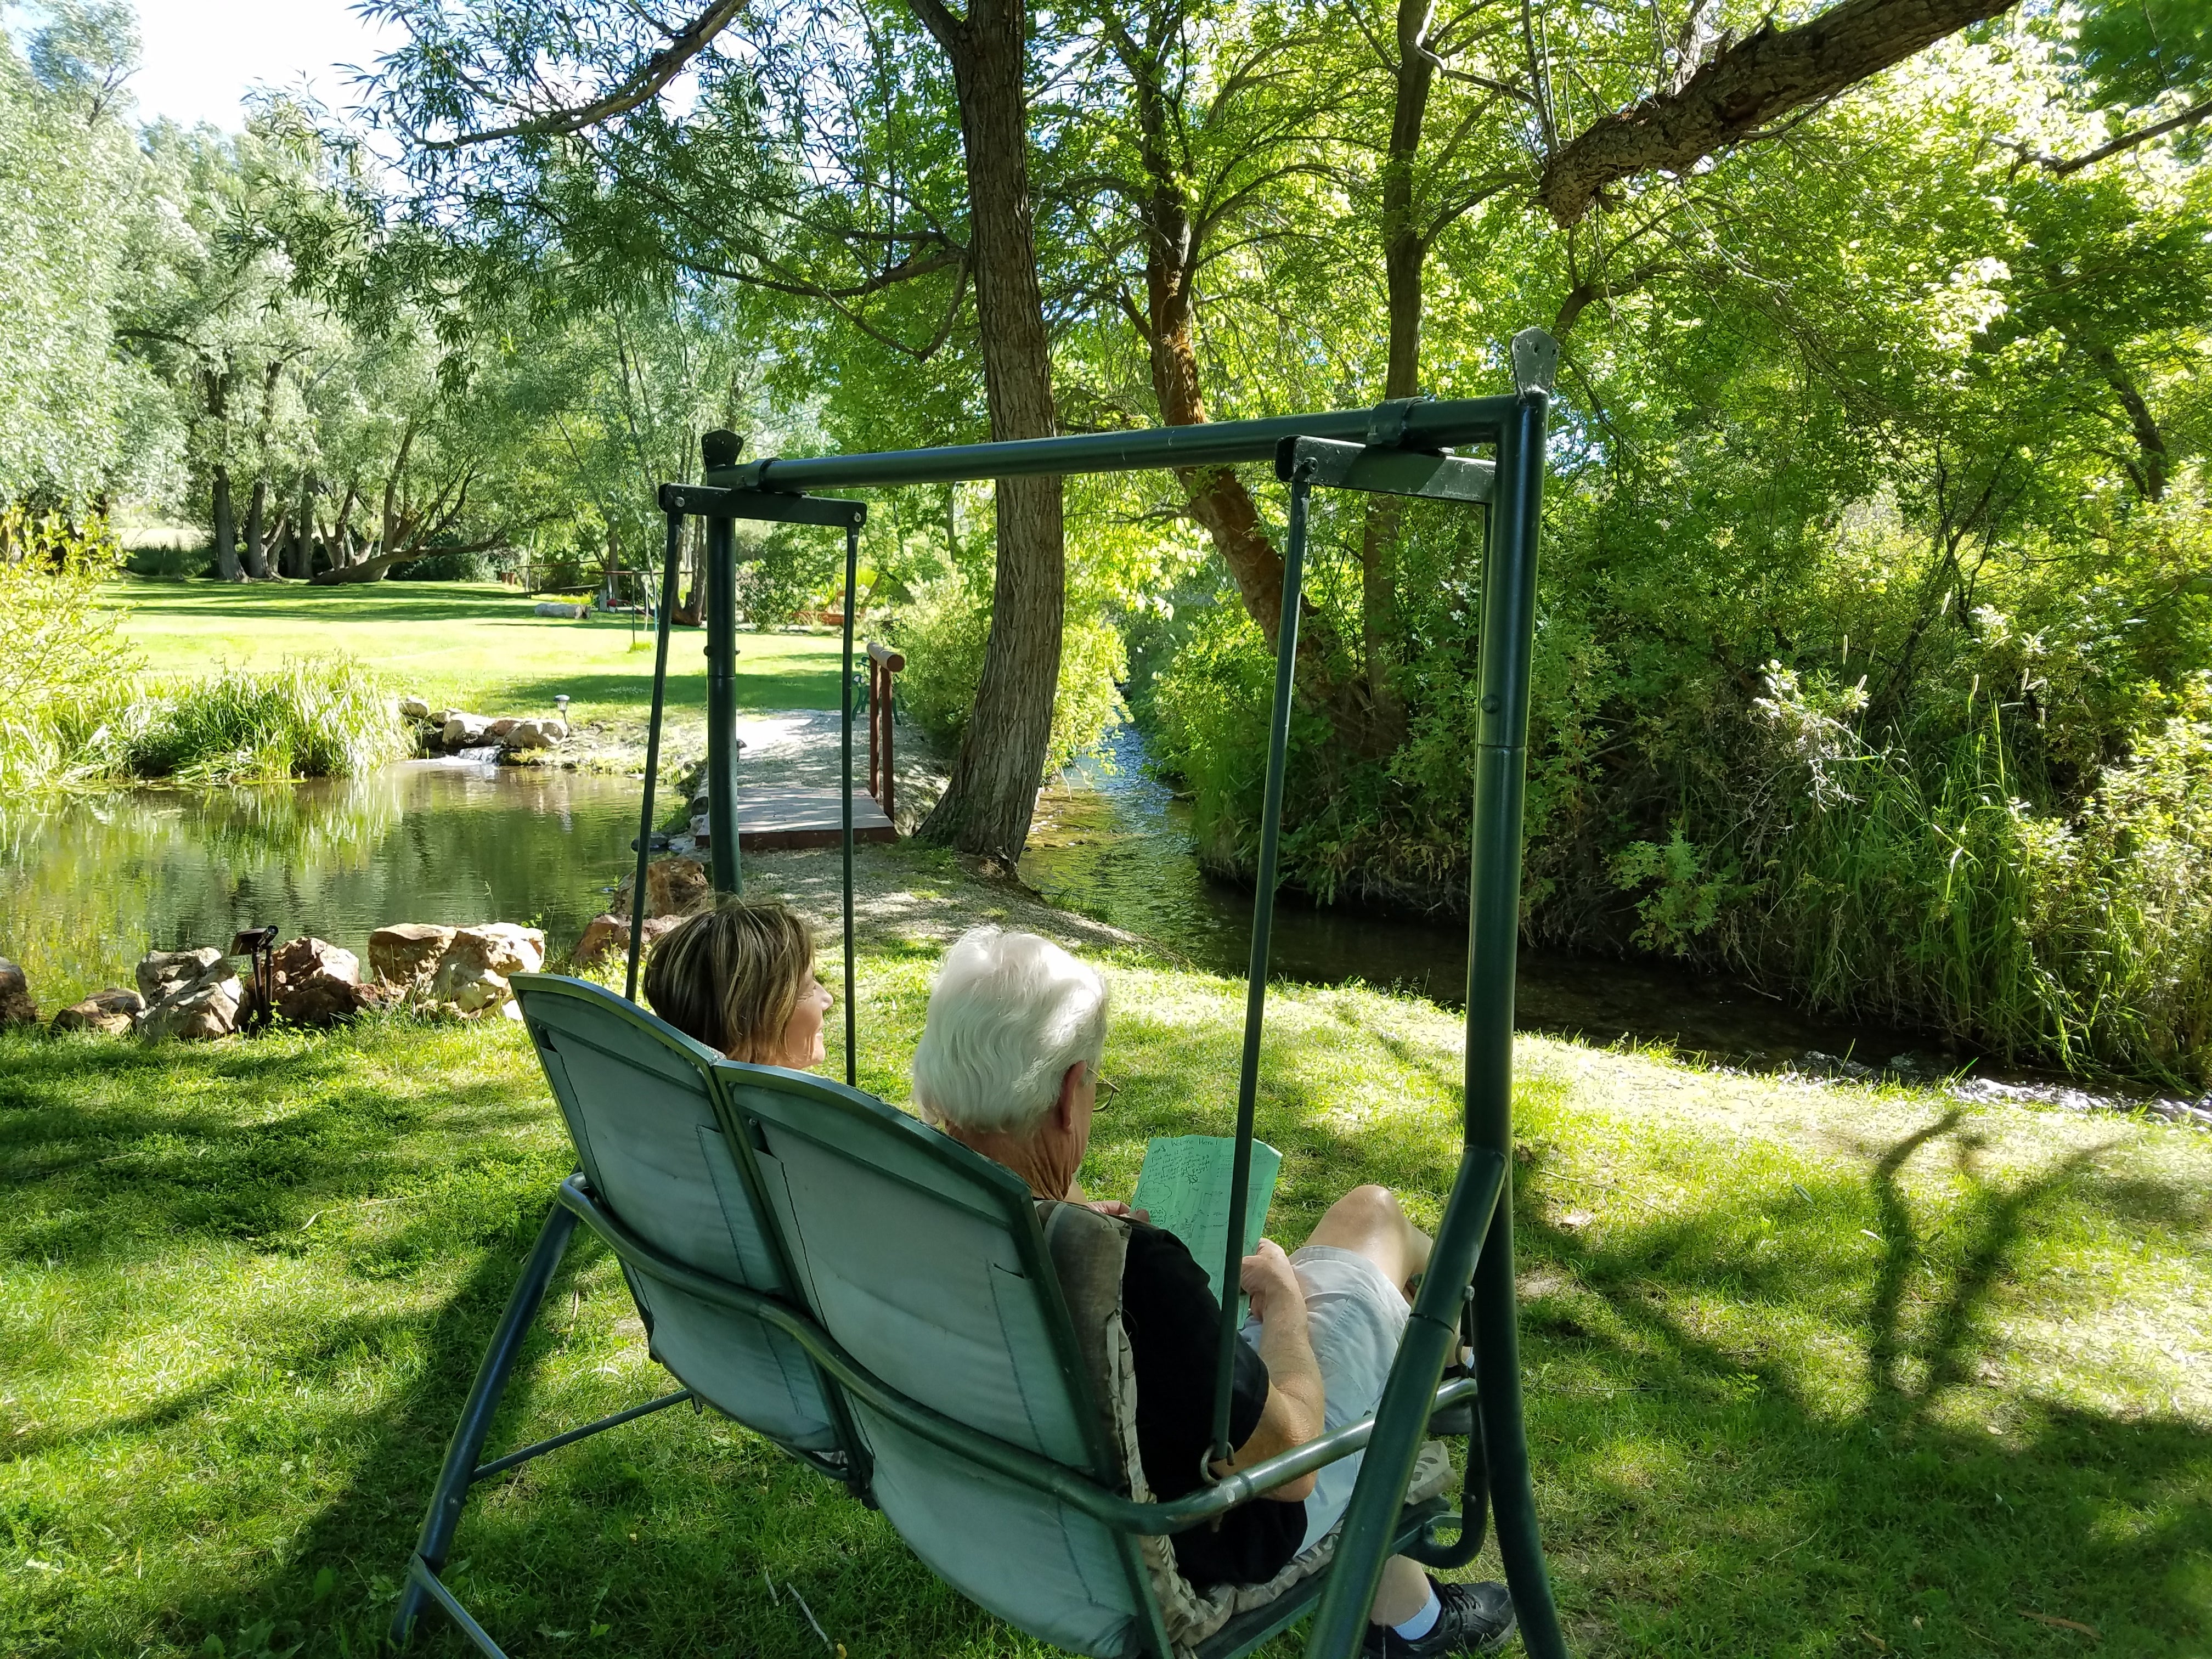 Enjoy a wonderful relaxing swing by the stream or by the other sitting areas nearby.